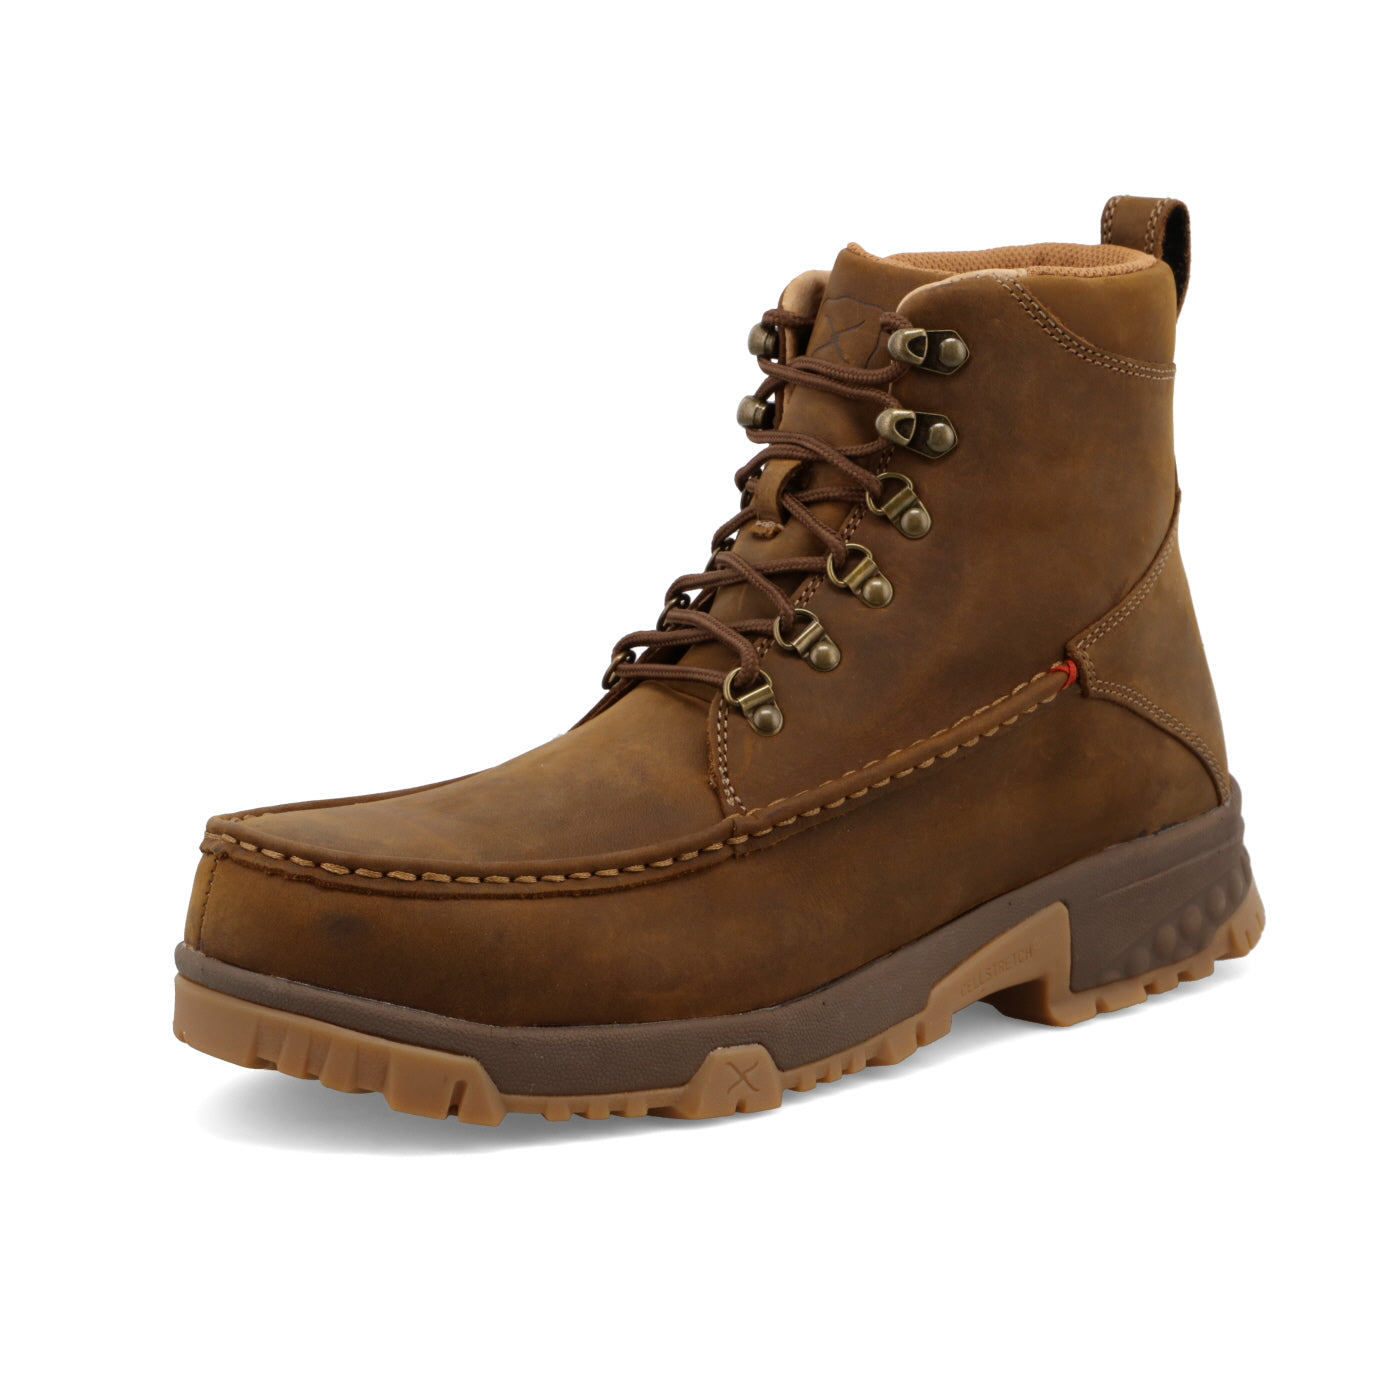 Twisted X Men's 6" Work Boot